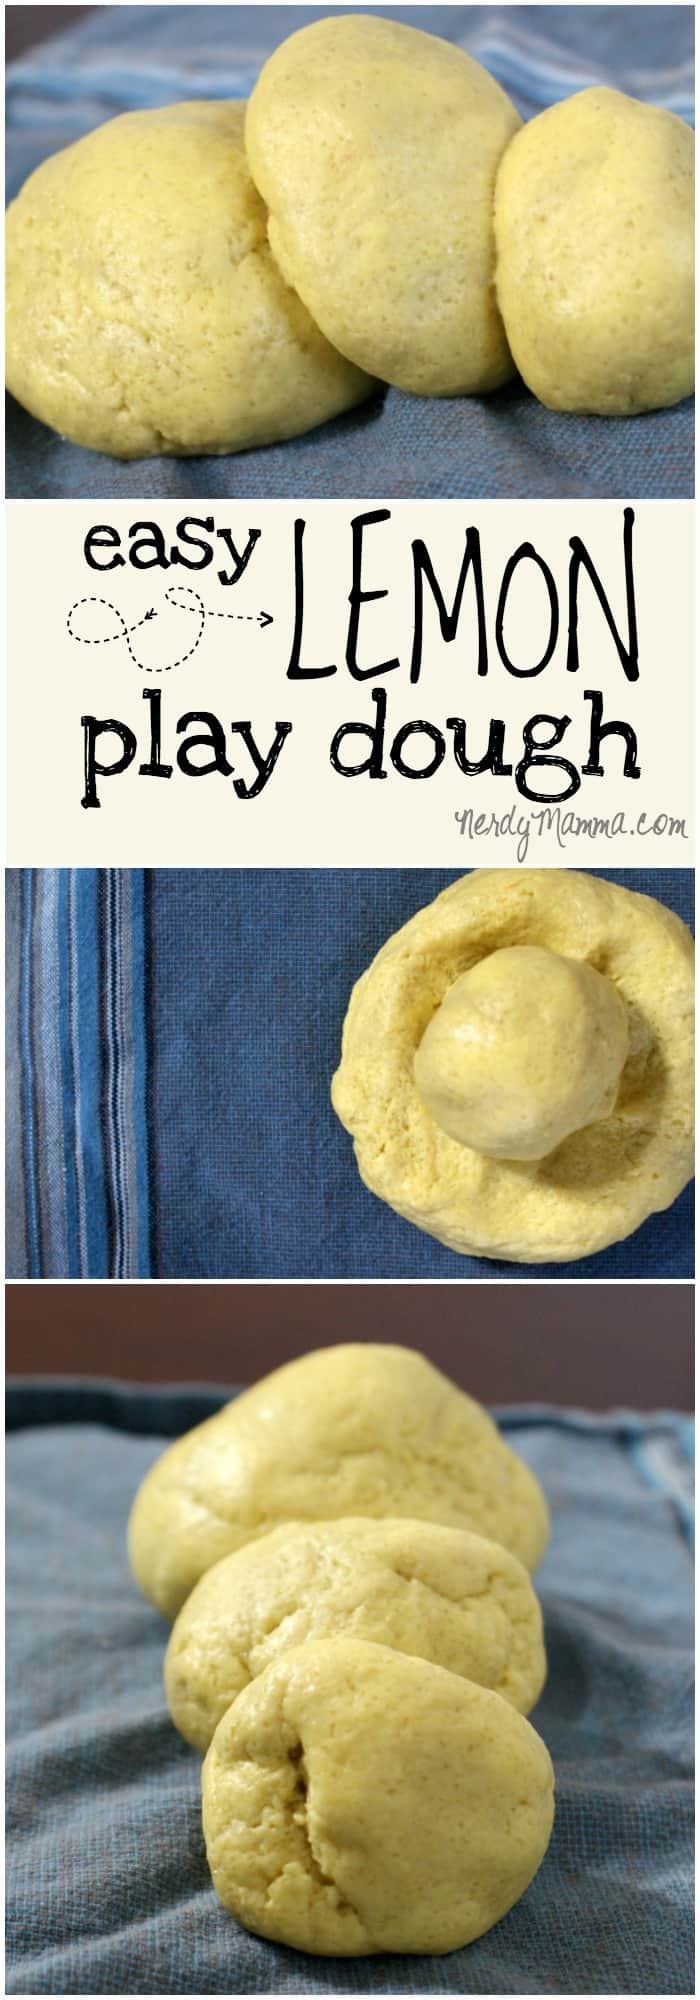 This recipe for lemon play dough is so easy and the kids loved playing with it. I can't wait to make them another batch.